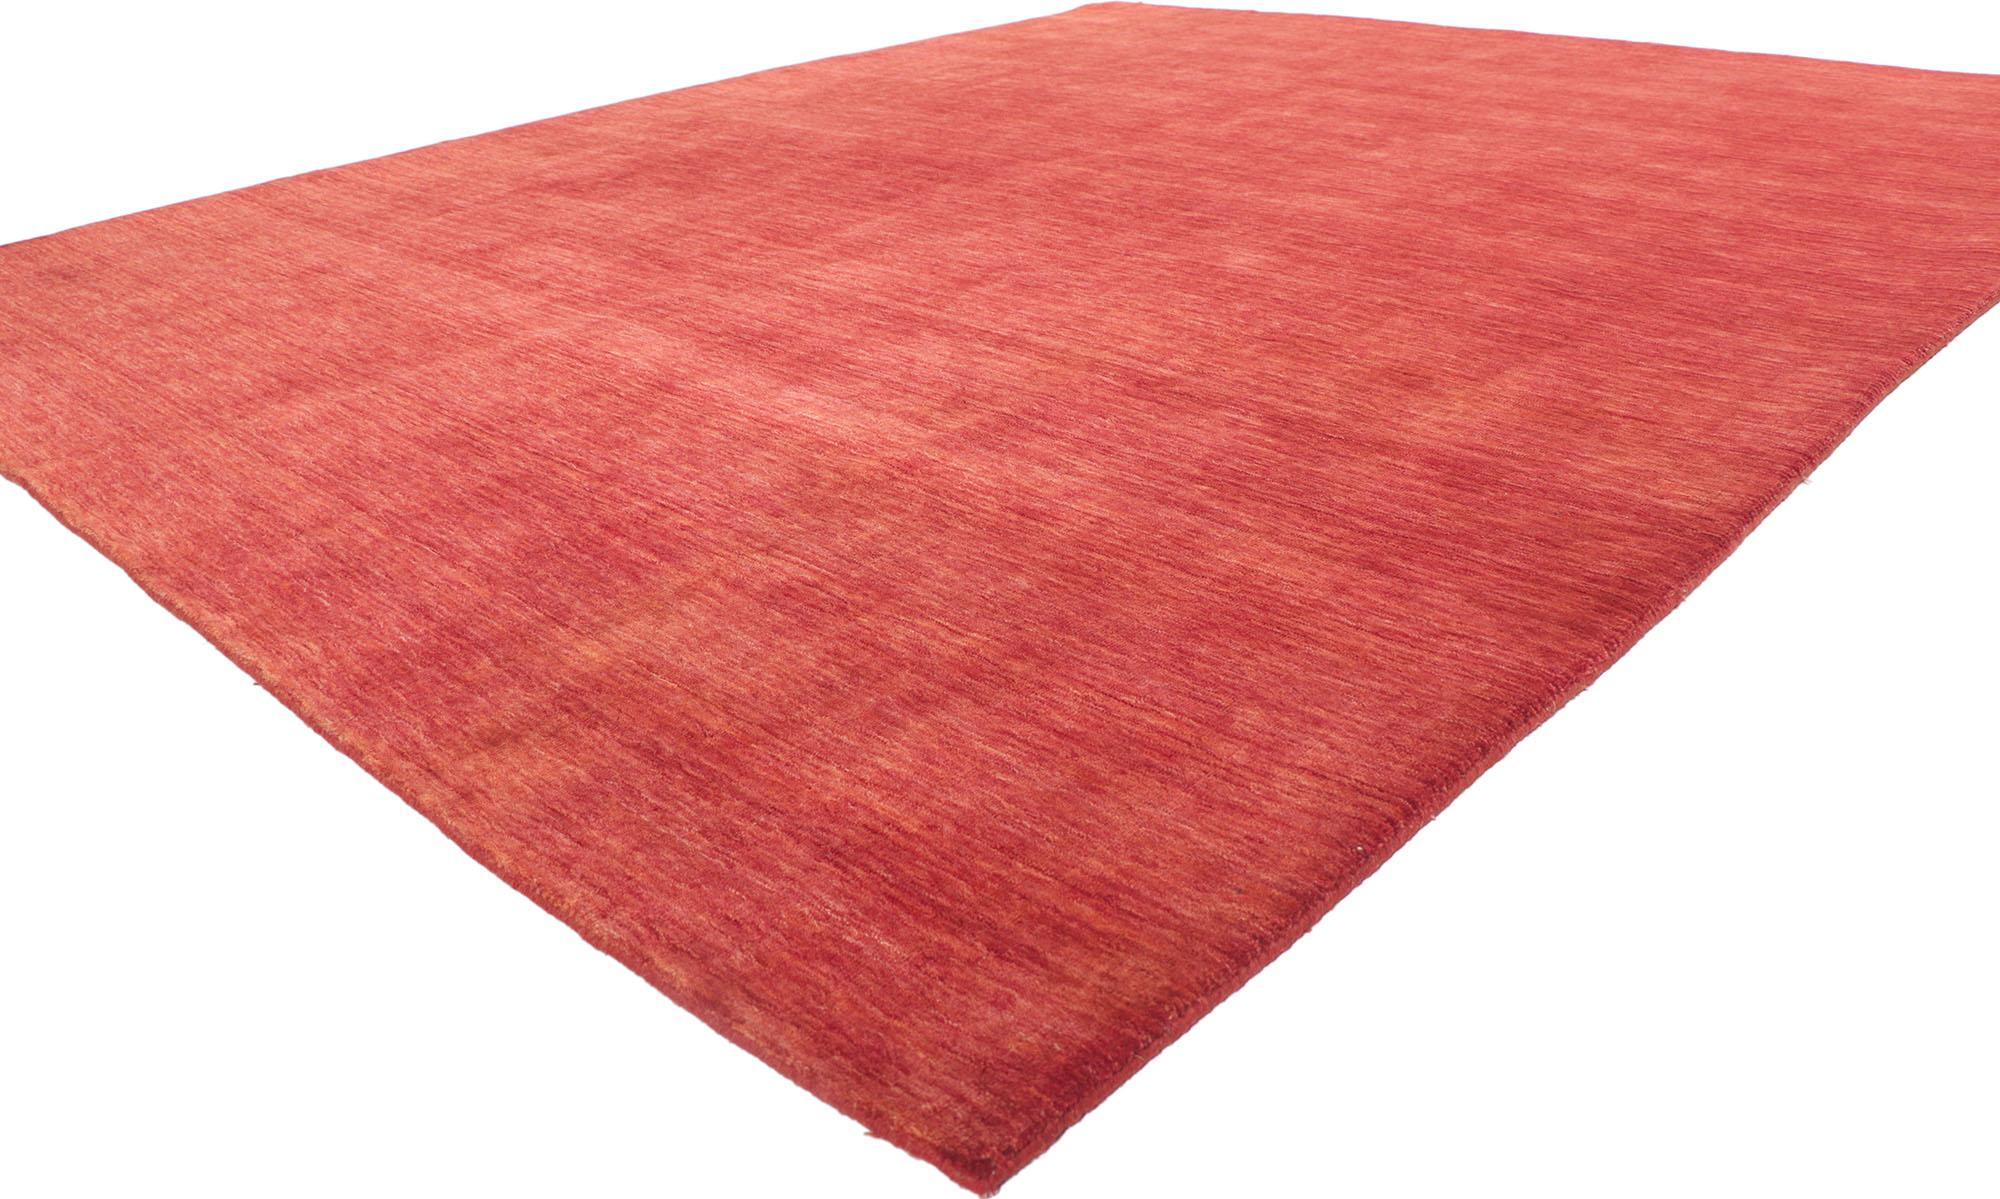 30726 New Contemporary Red Area rug with Modern Style 10'00 x 12'10. Effortless, elegant, and casual meets the eye in this contemporary Indian area rug. It features gorgeous red hues and softly gradated striations running selvage to selvage blending